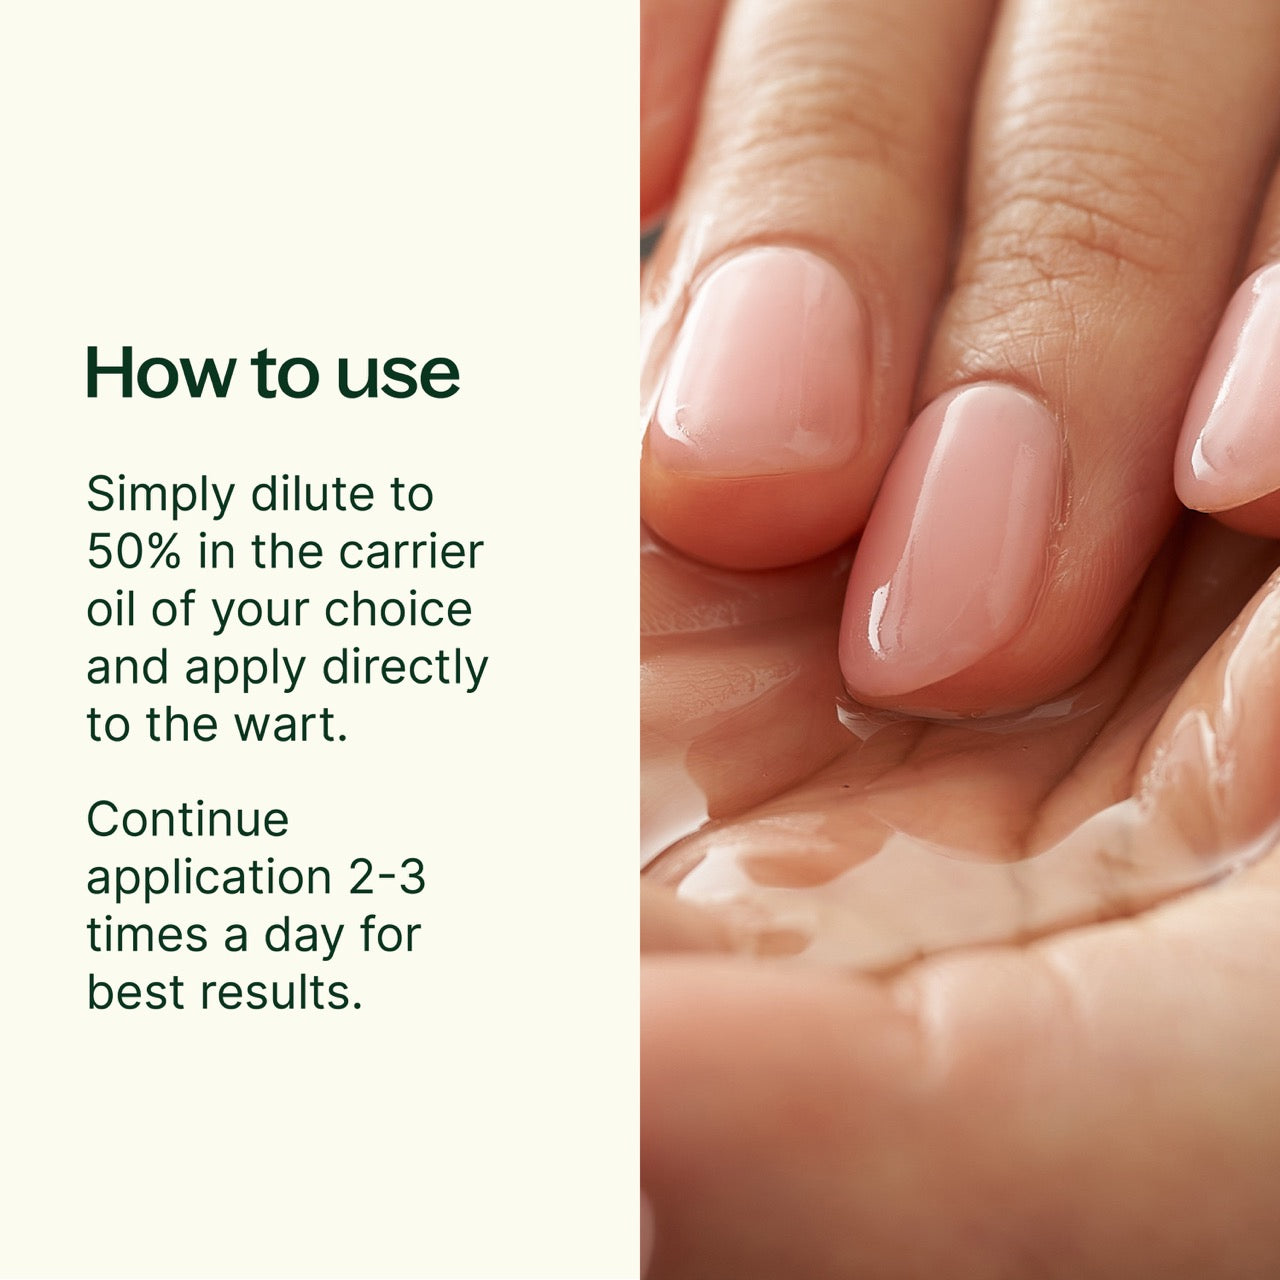 No More Warts KidSafe Essential Oil how to use: Dilute to 50% in the carrier oil of your choice and apply directly to wart. Continue application 2-3 times a day for best results. 